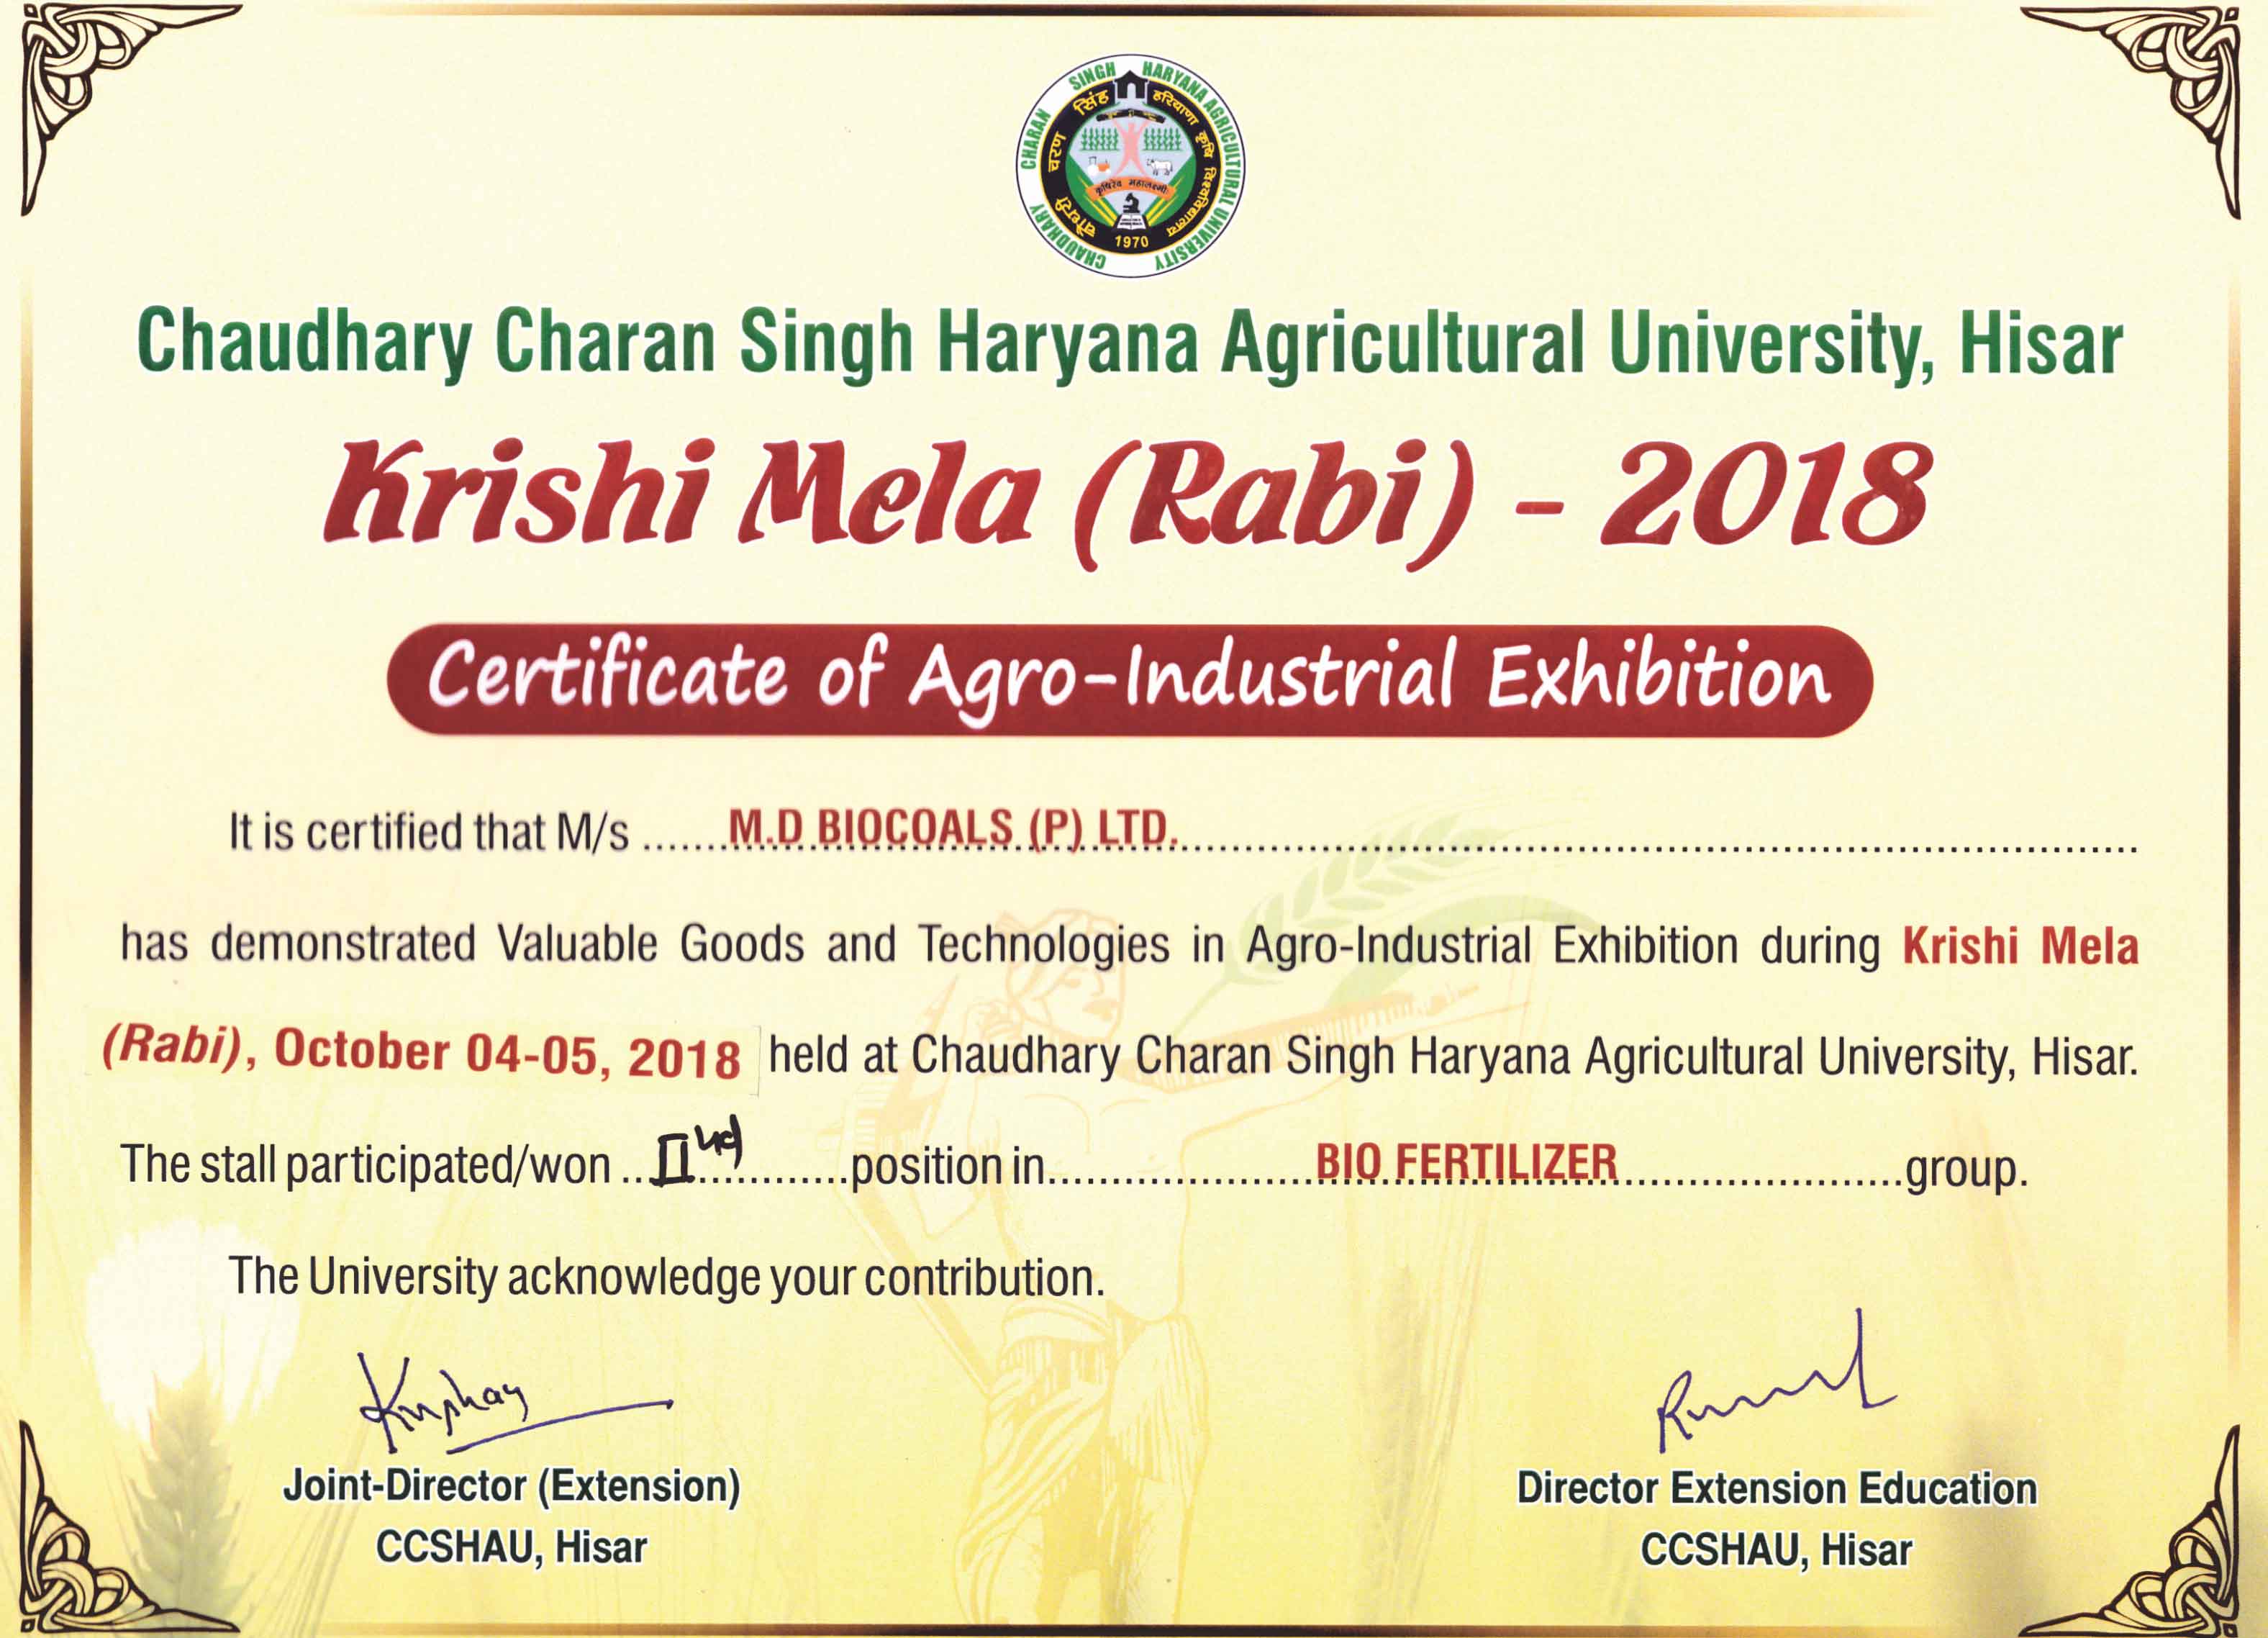 2nd Position Certificate of Agro-Industrial Exhibition, CCCS HAU, Hisar